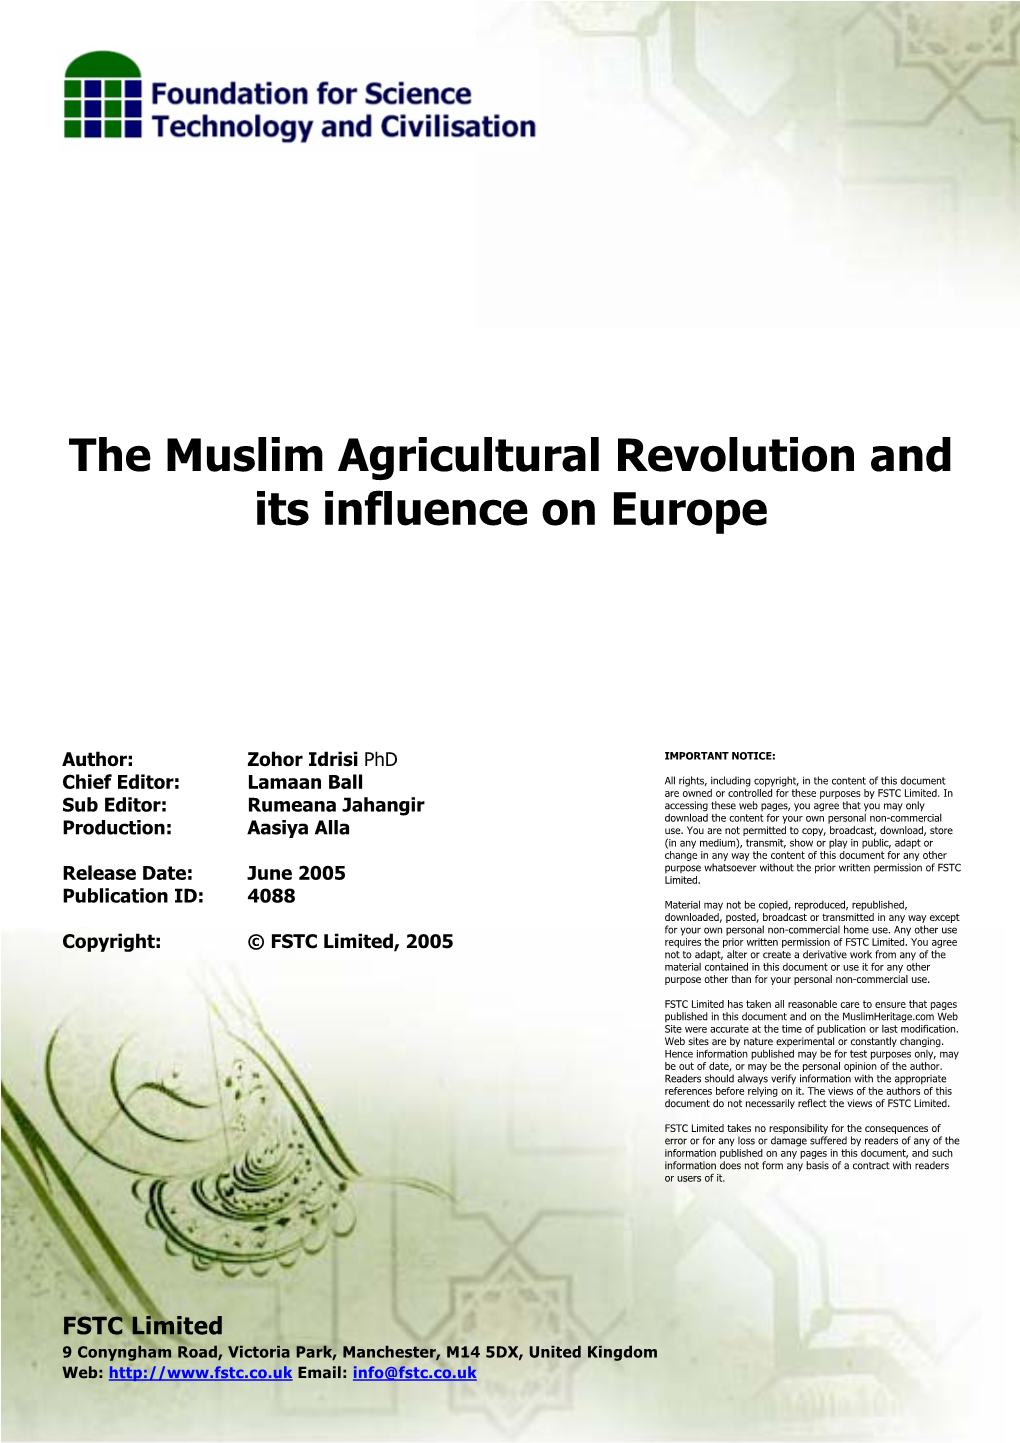 The Muslim Agricultural Revolution and Its Influence on Europe